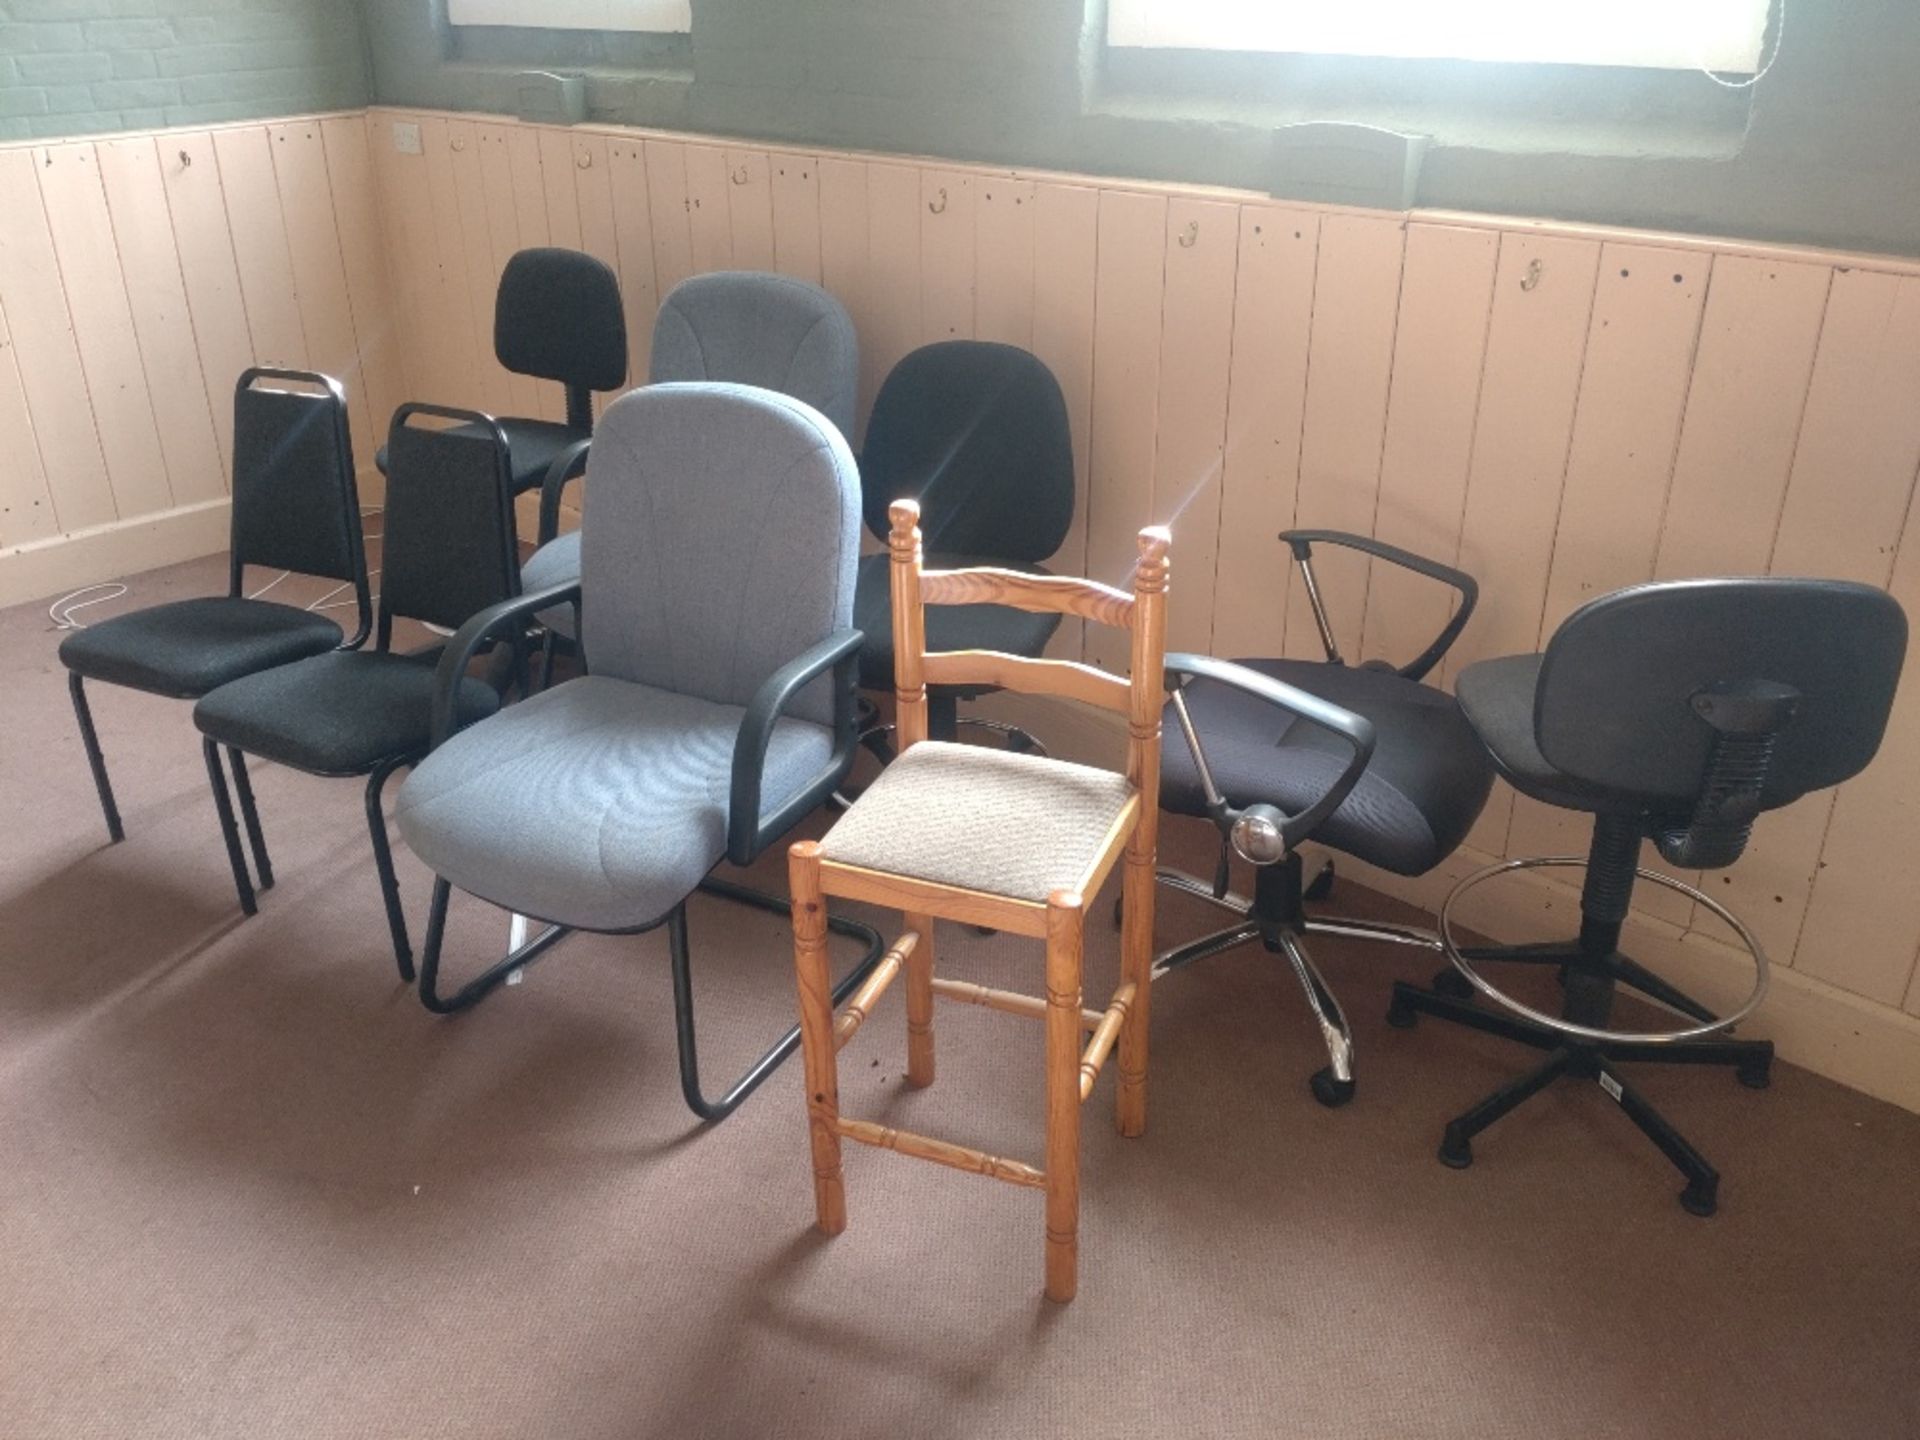 Quantity of misc chairs